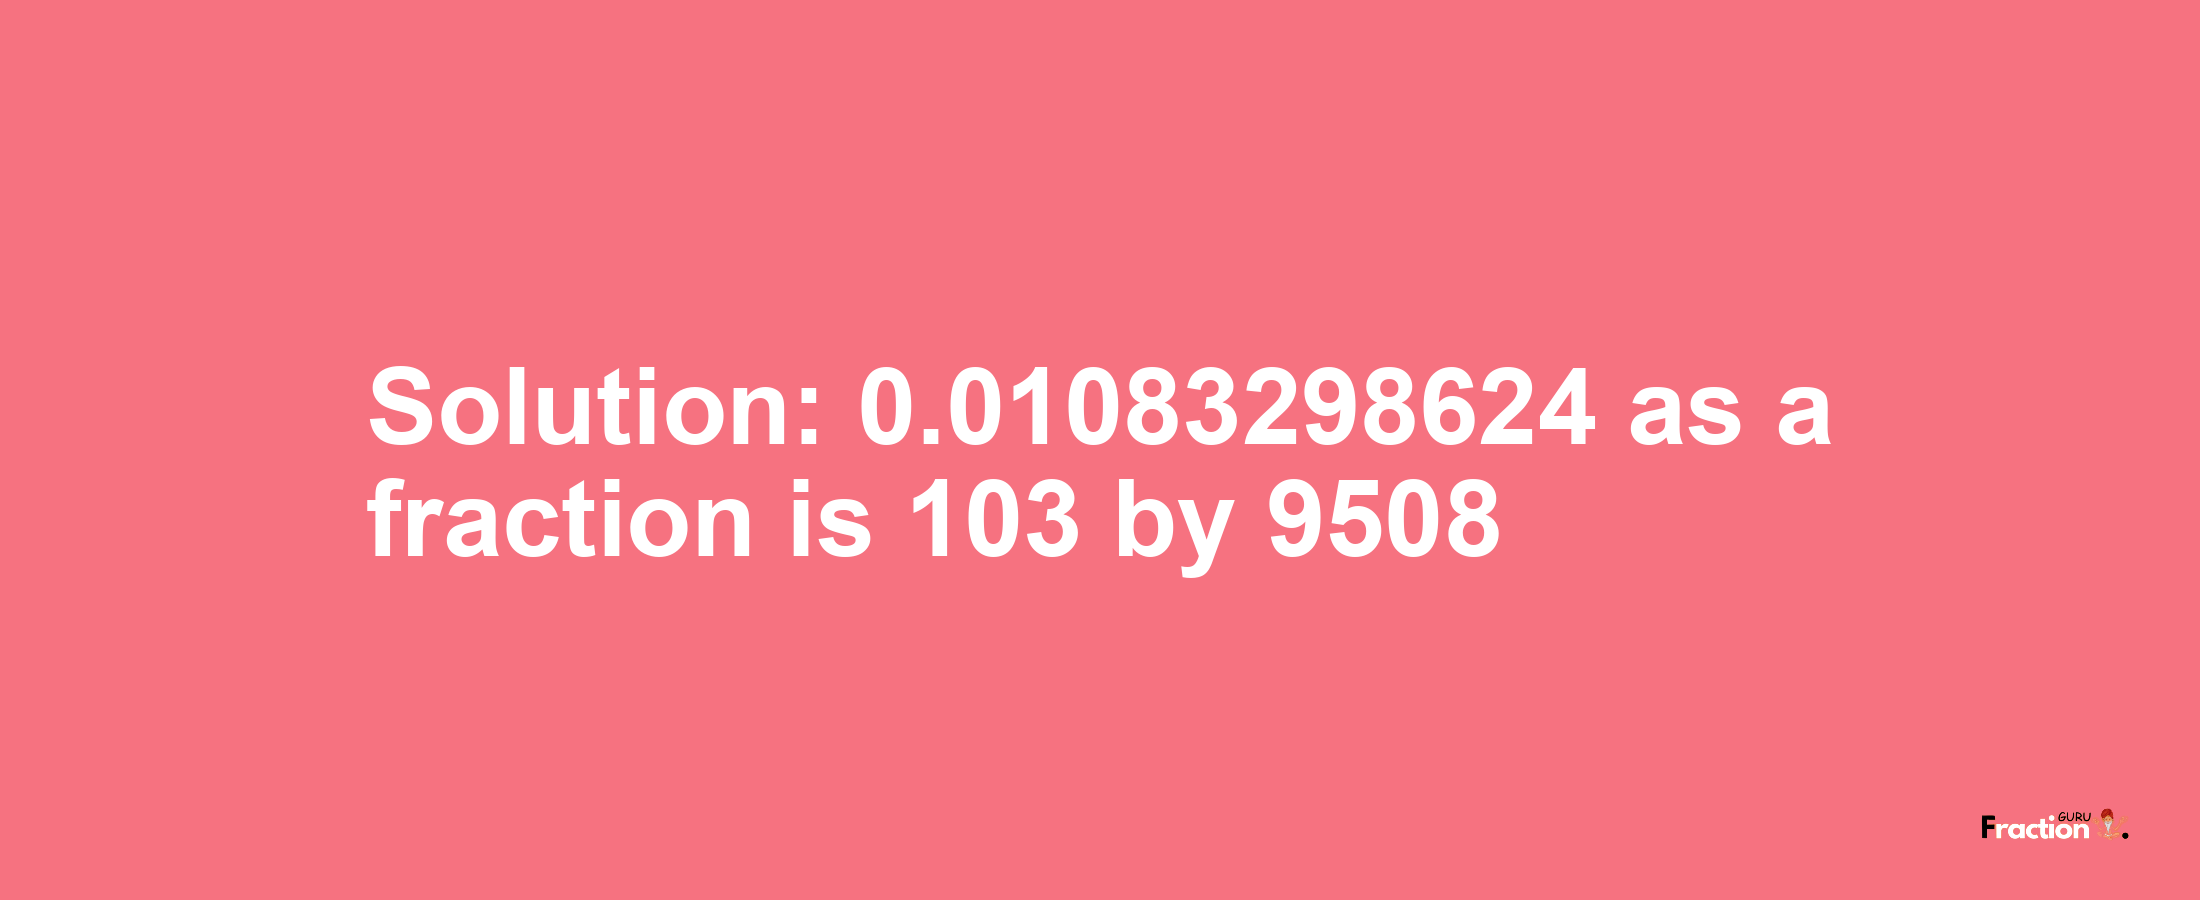 Solution:0.01083298624 as a fraction is 103/9508